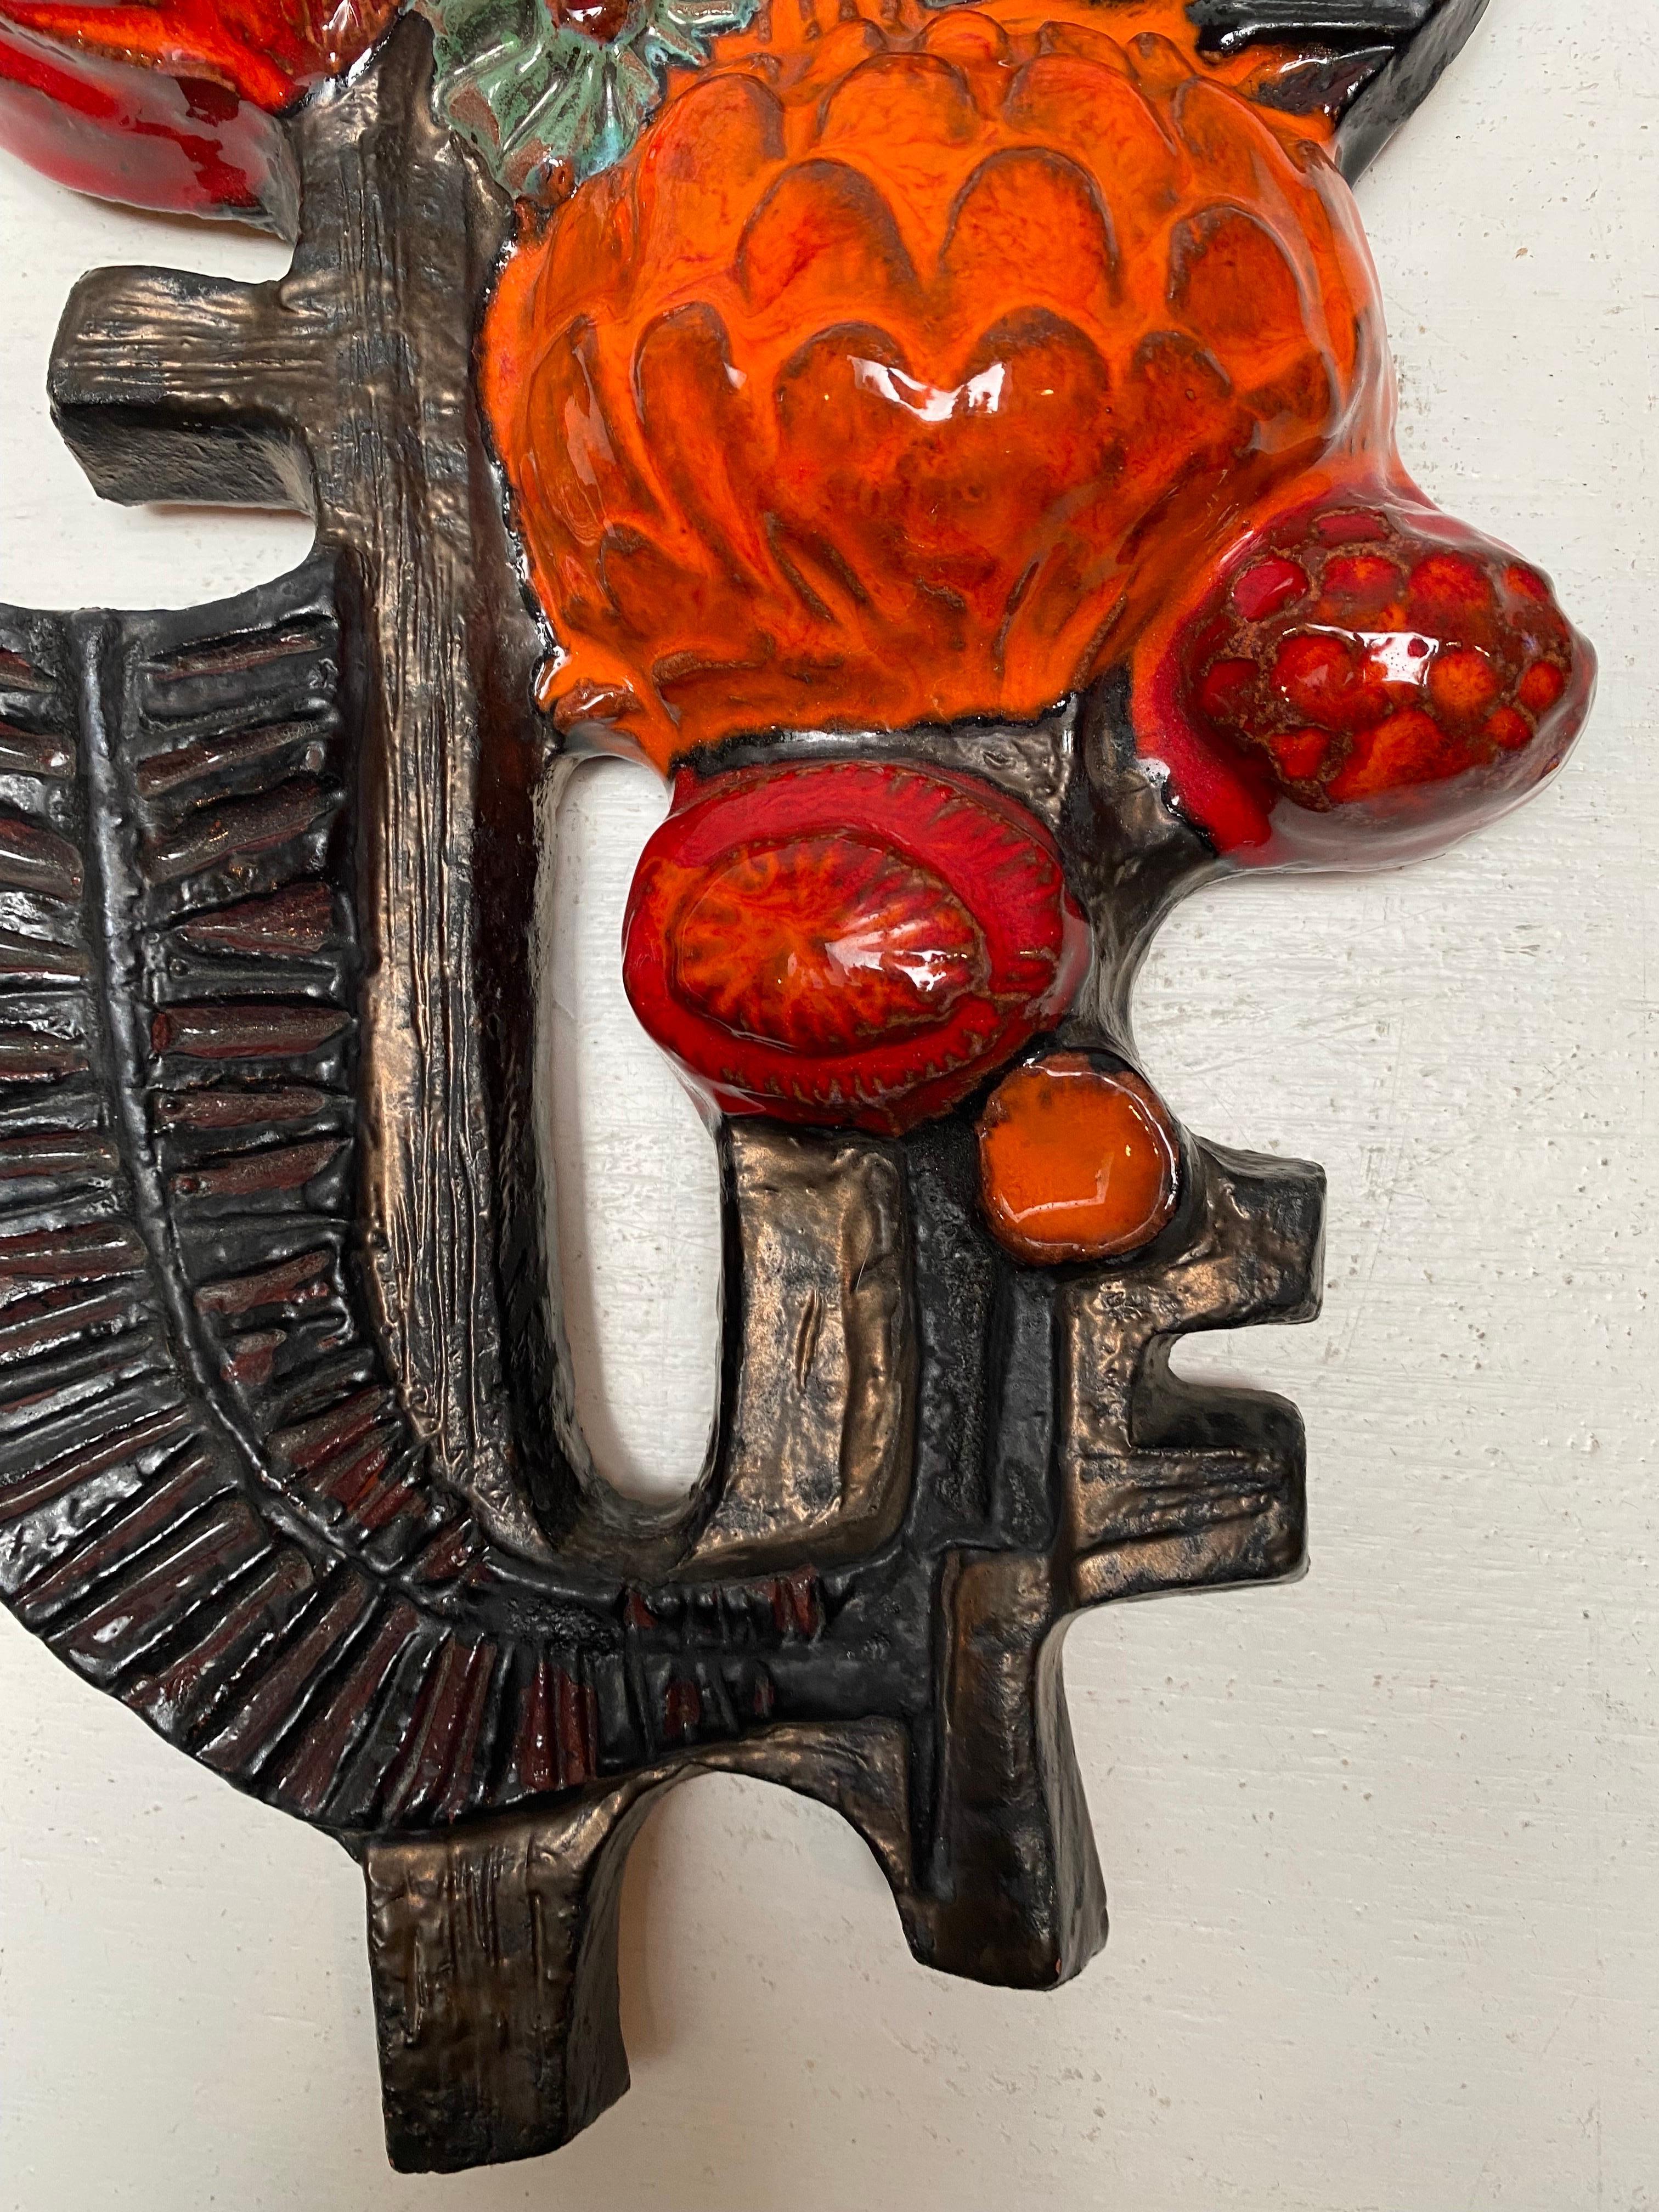 Beautiful abstracted flower wall sculpture was a cooperation between Perignem and Paul Vermeire.
a colorful decorative ceramic wall mounted sculpture with colors in deep red, black and orange glaze. The sculpture is in perfect condition. 